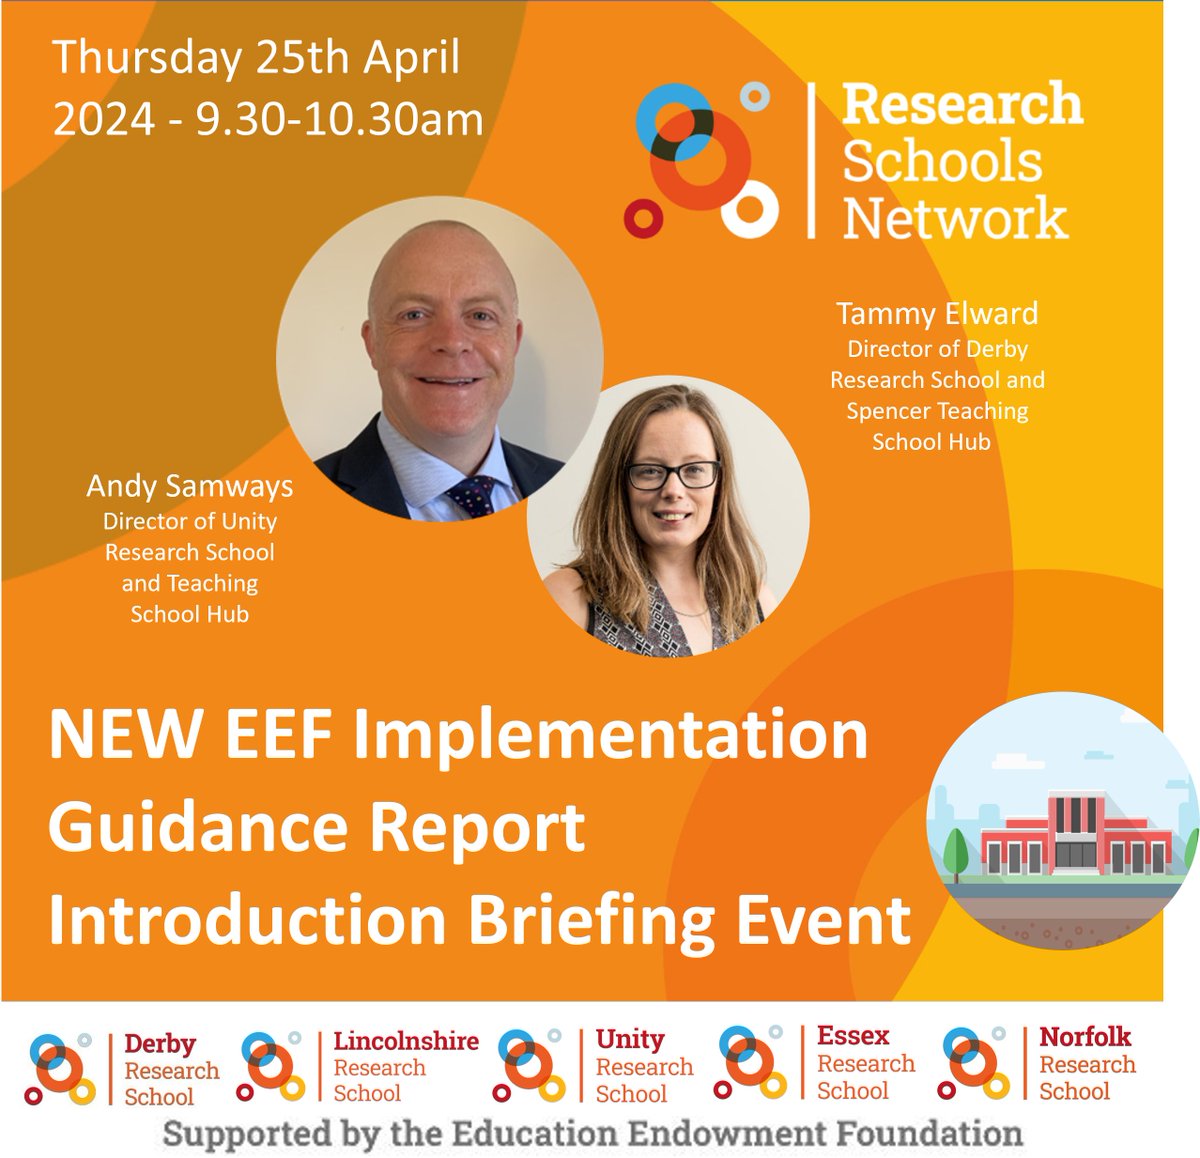 ⭐️Don't miss out! ⭐️ With the launch of the new EEF Implementation Guidance Report tomorrow, be the first to find out about the changes. Sign up here ➡️tinyurl.com/k4jxb6zt.